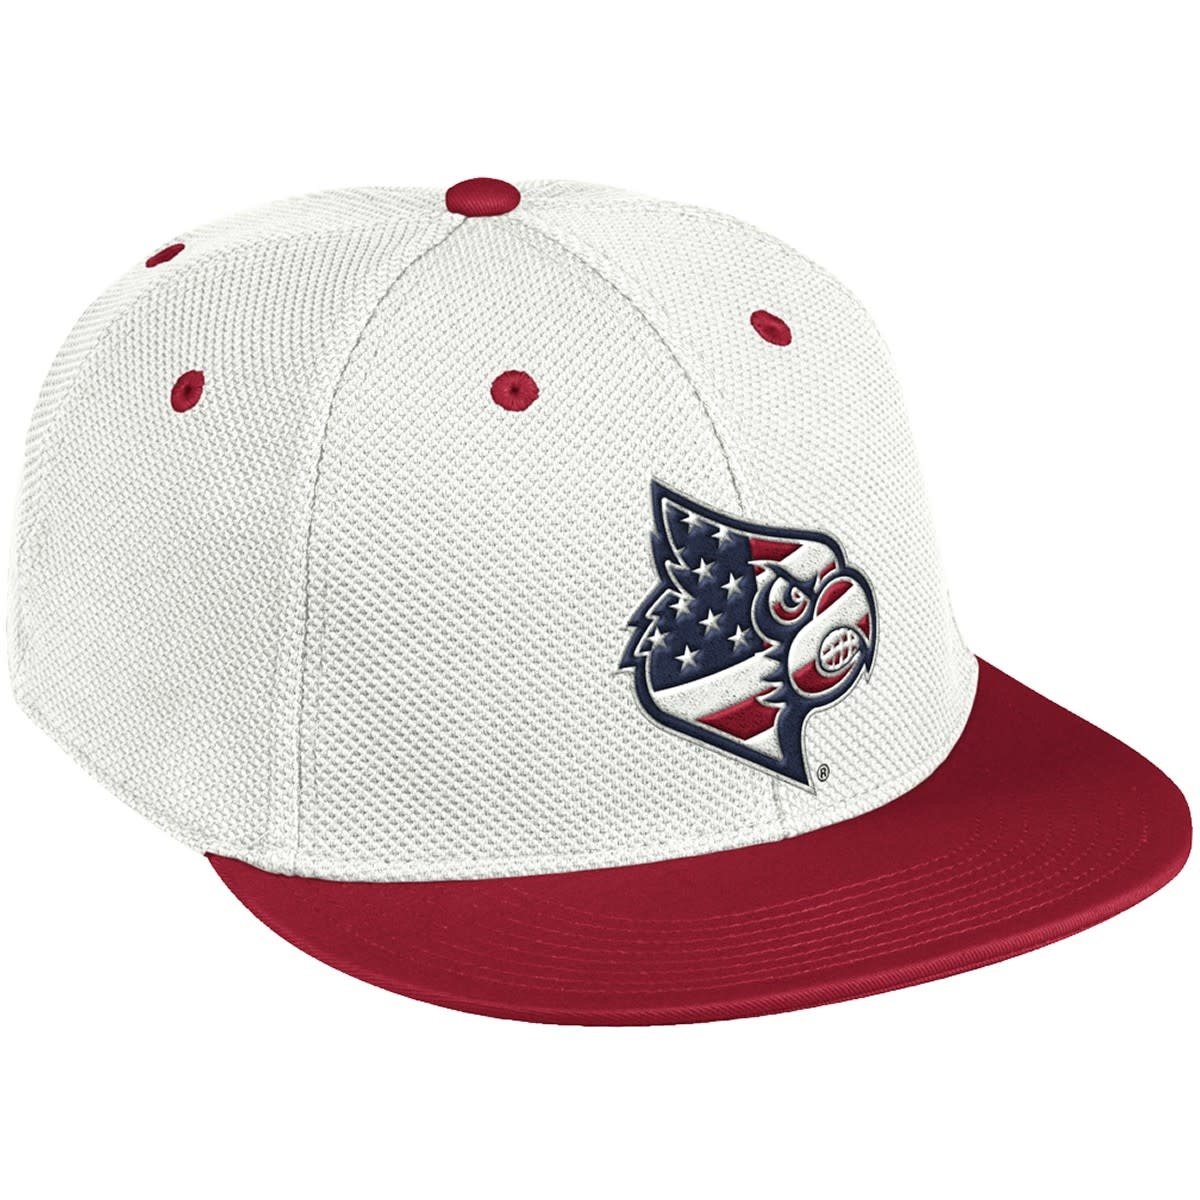 Louisville Bats - 🚨 Redbirds fitted hats are BACK 🚨 Available in